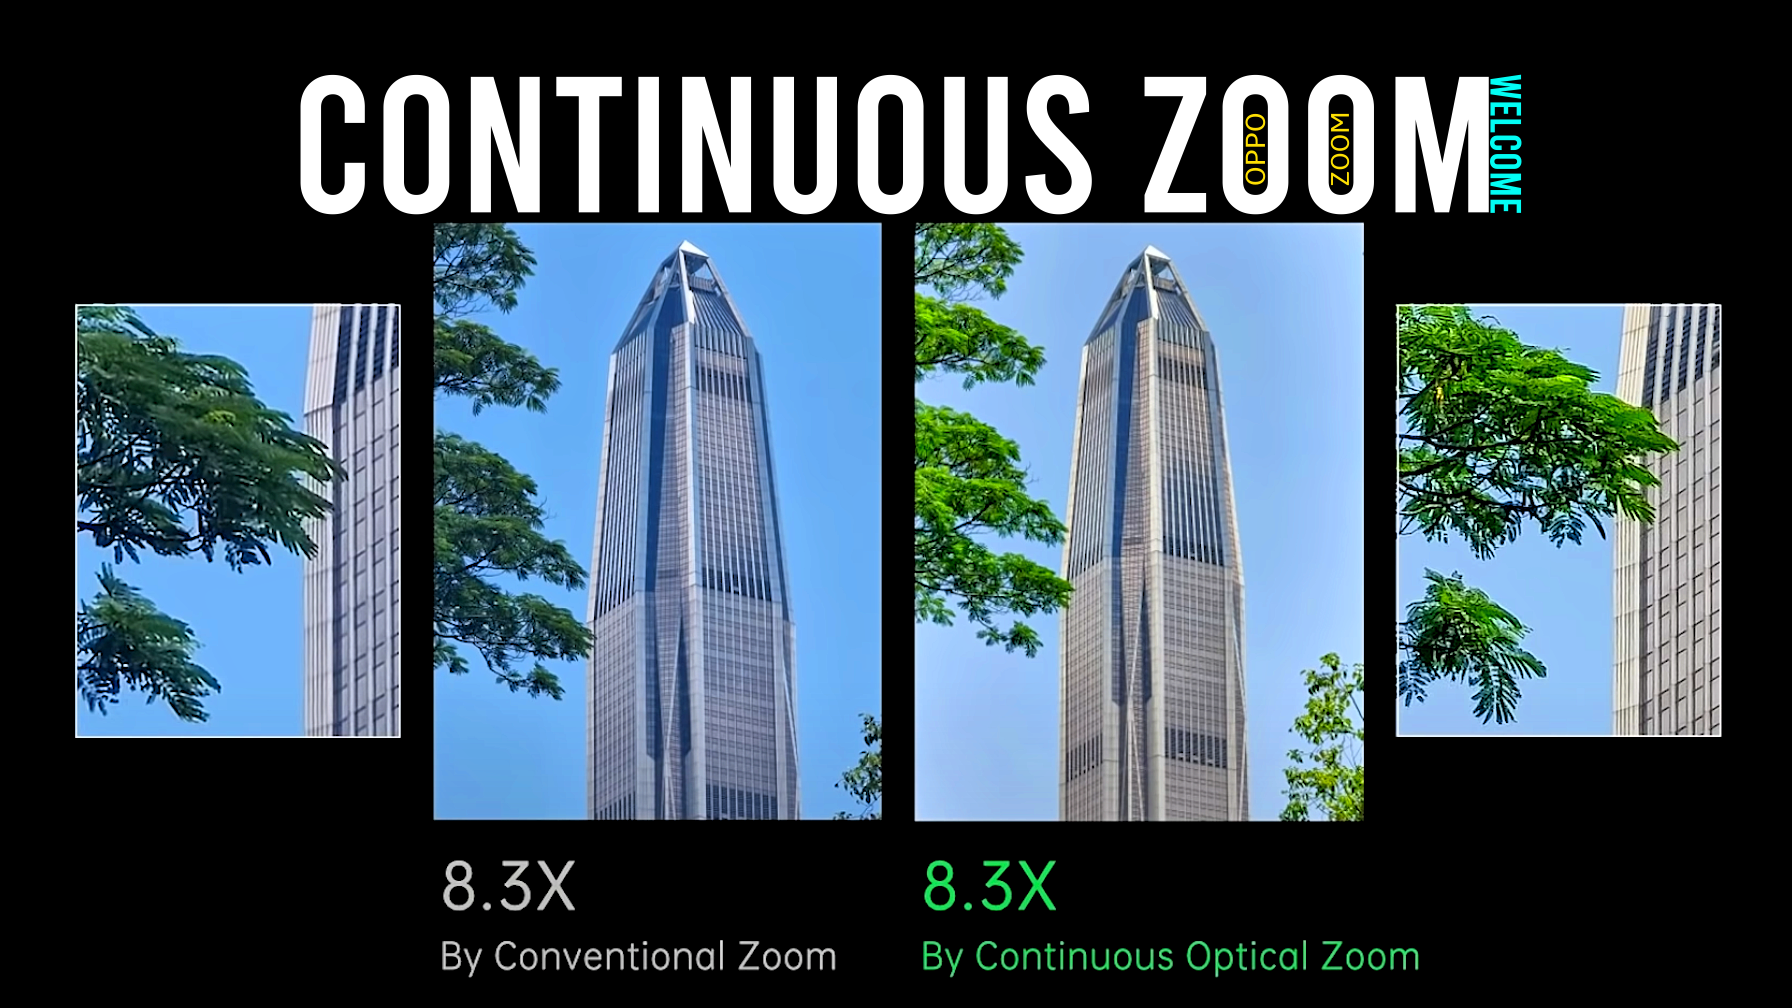 Oppo's continuous zoom concept. - See how Pixel 6 Pro's 4x periscope zoom camera could dominate the Galaxy S21 Ultra's 10x lens